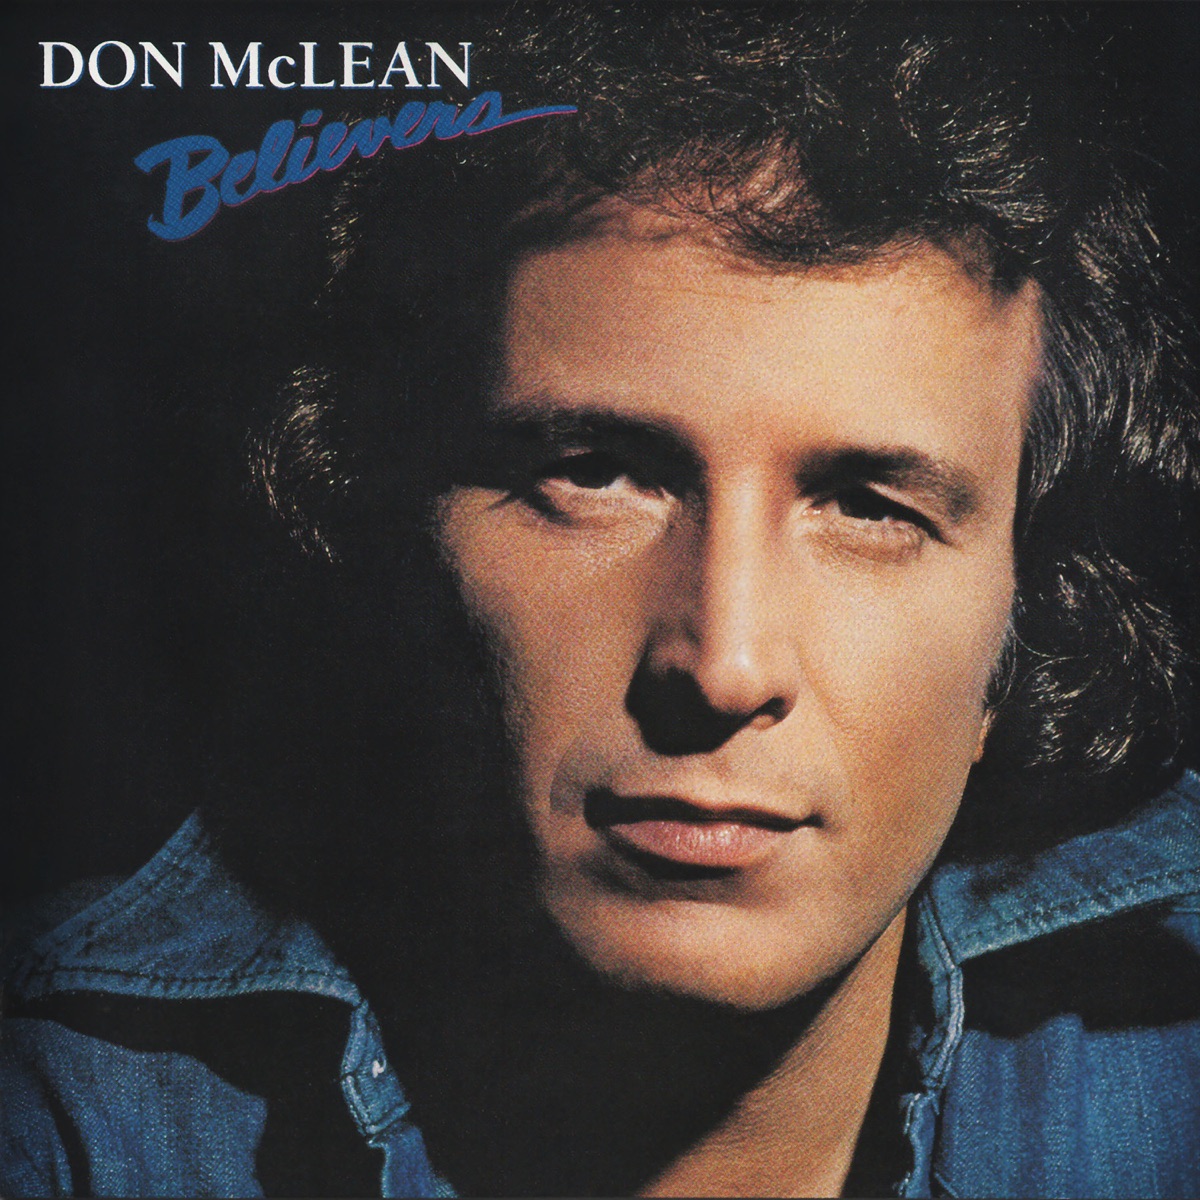 American Pie by Don Mclean on Apple Music